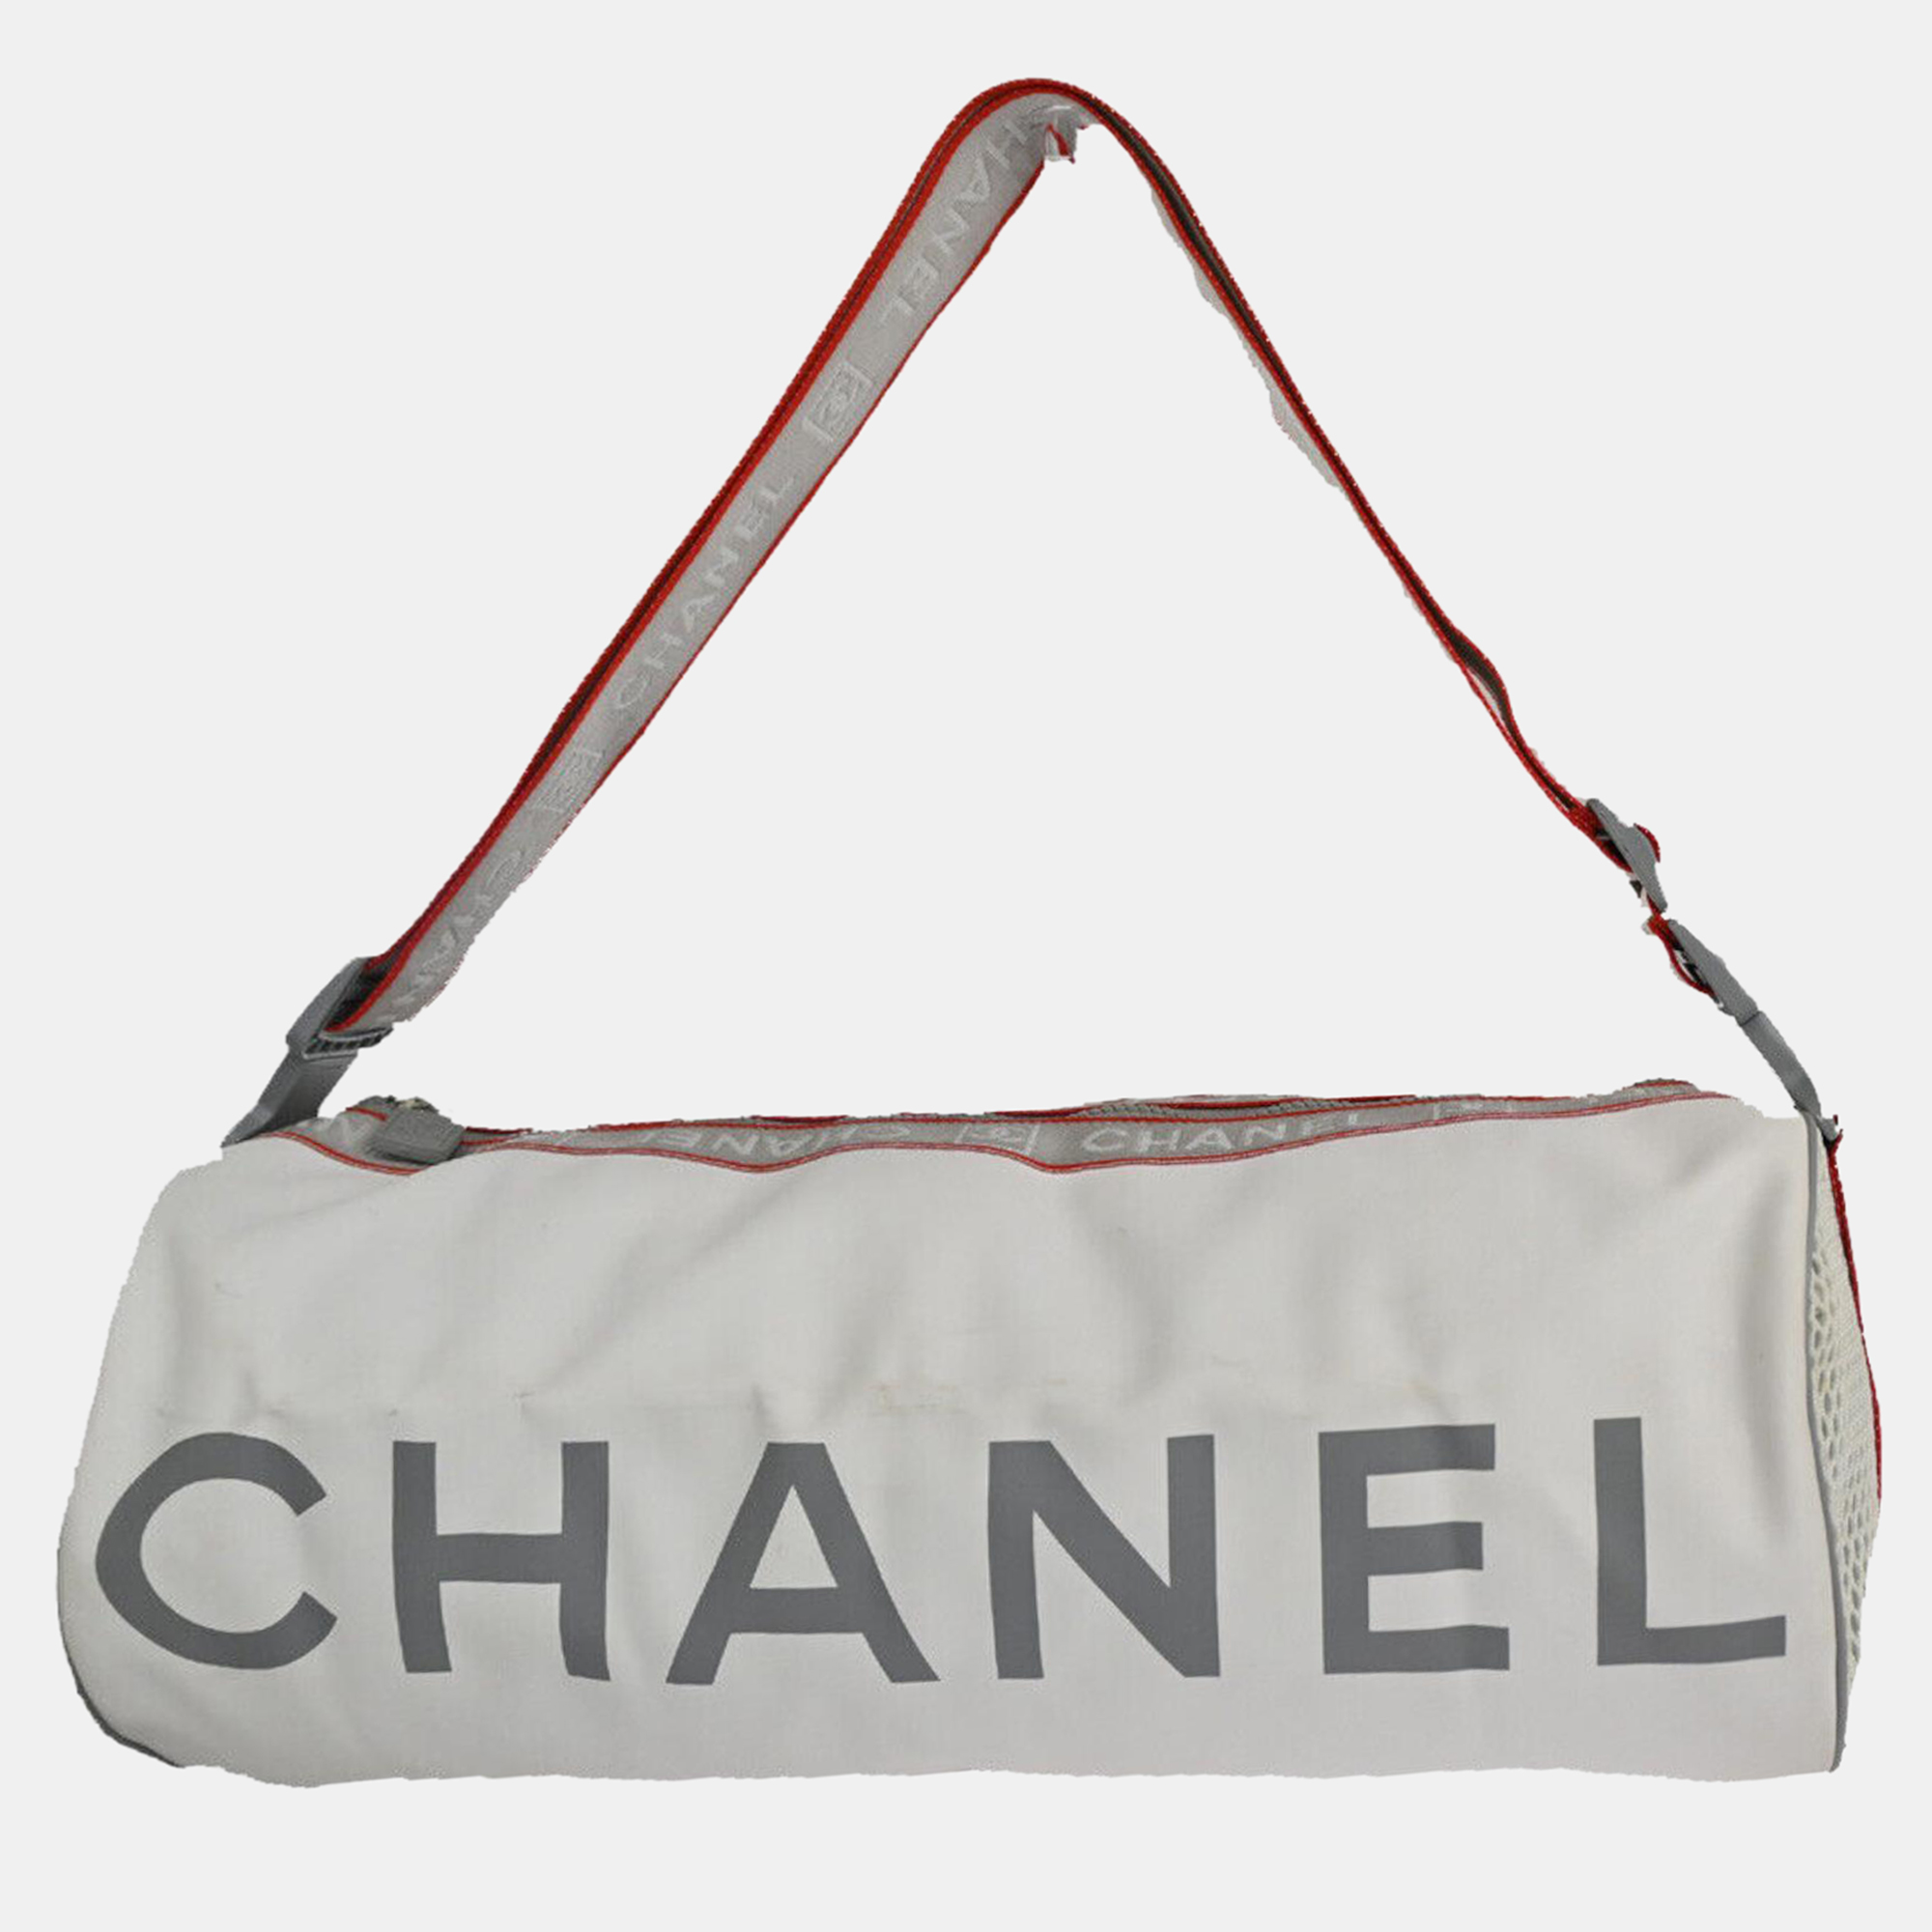 This elegant Chanel bag is perfect to enhance your everyday style. It is carefully sewn and finished to be a wonderful investment in your closet.